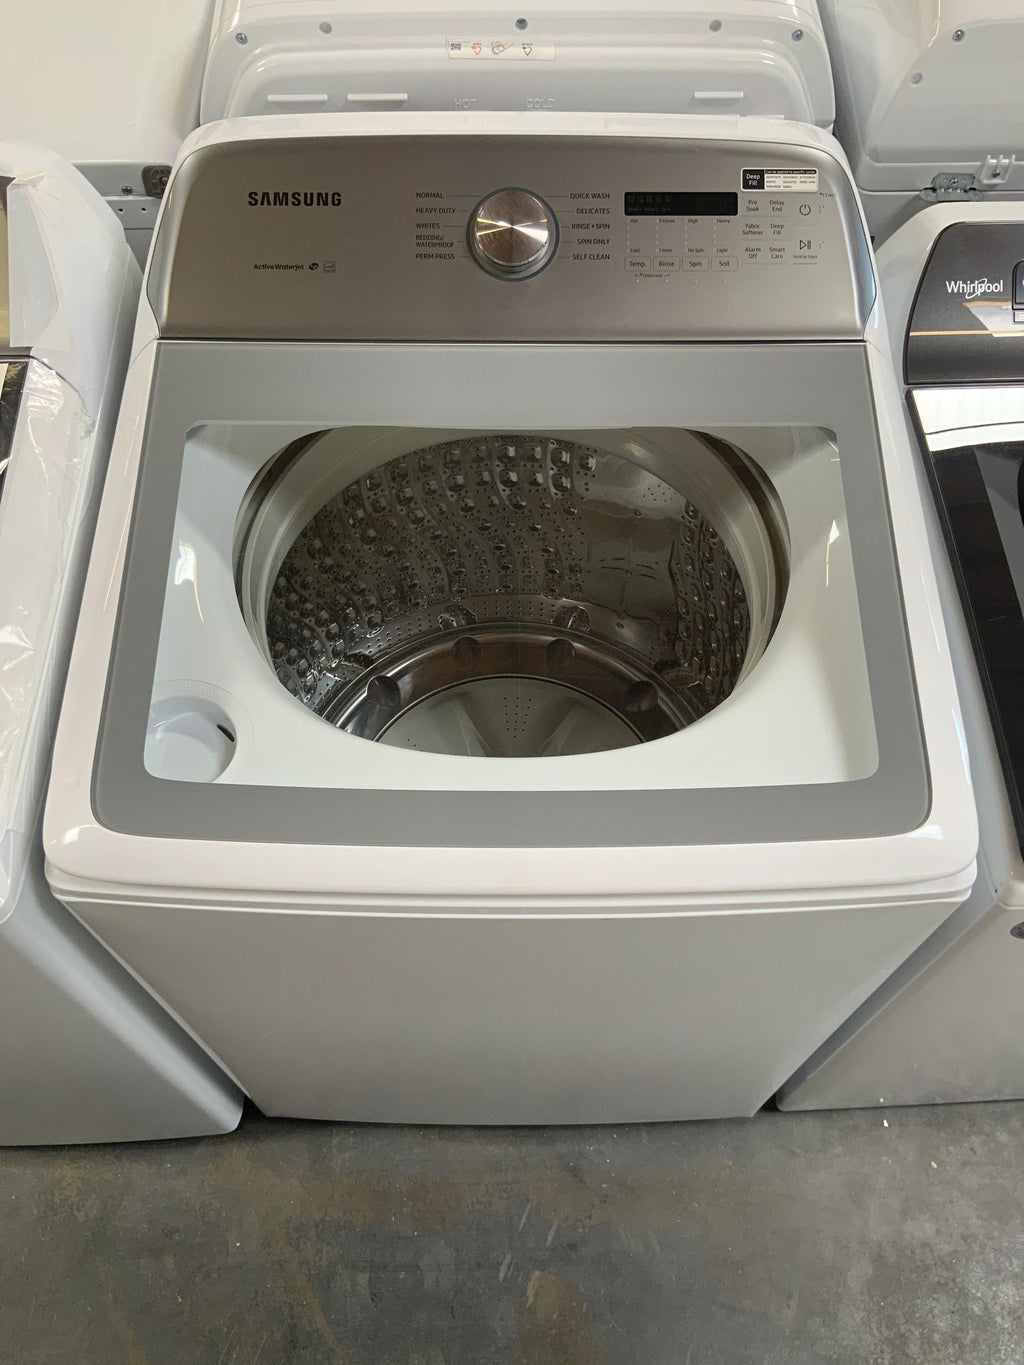 5.0 cu. ft. Top Load Washer with Active Water Jet in White Washer